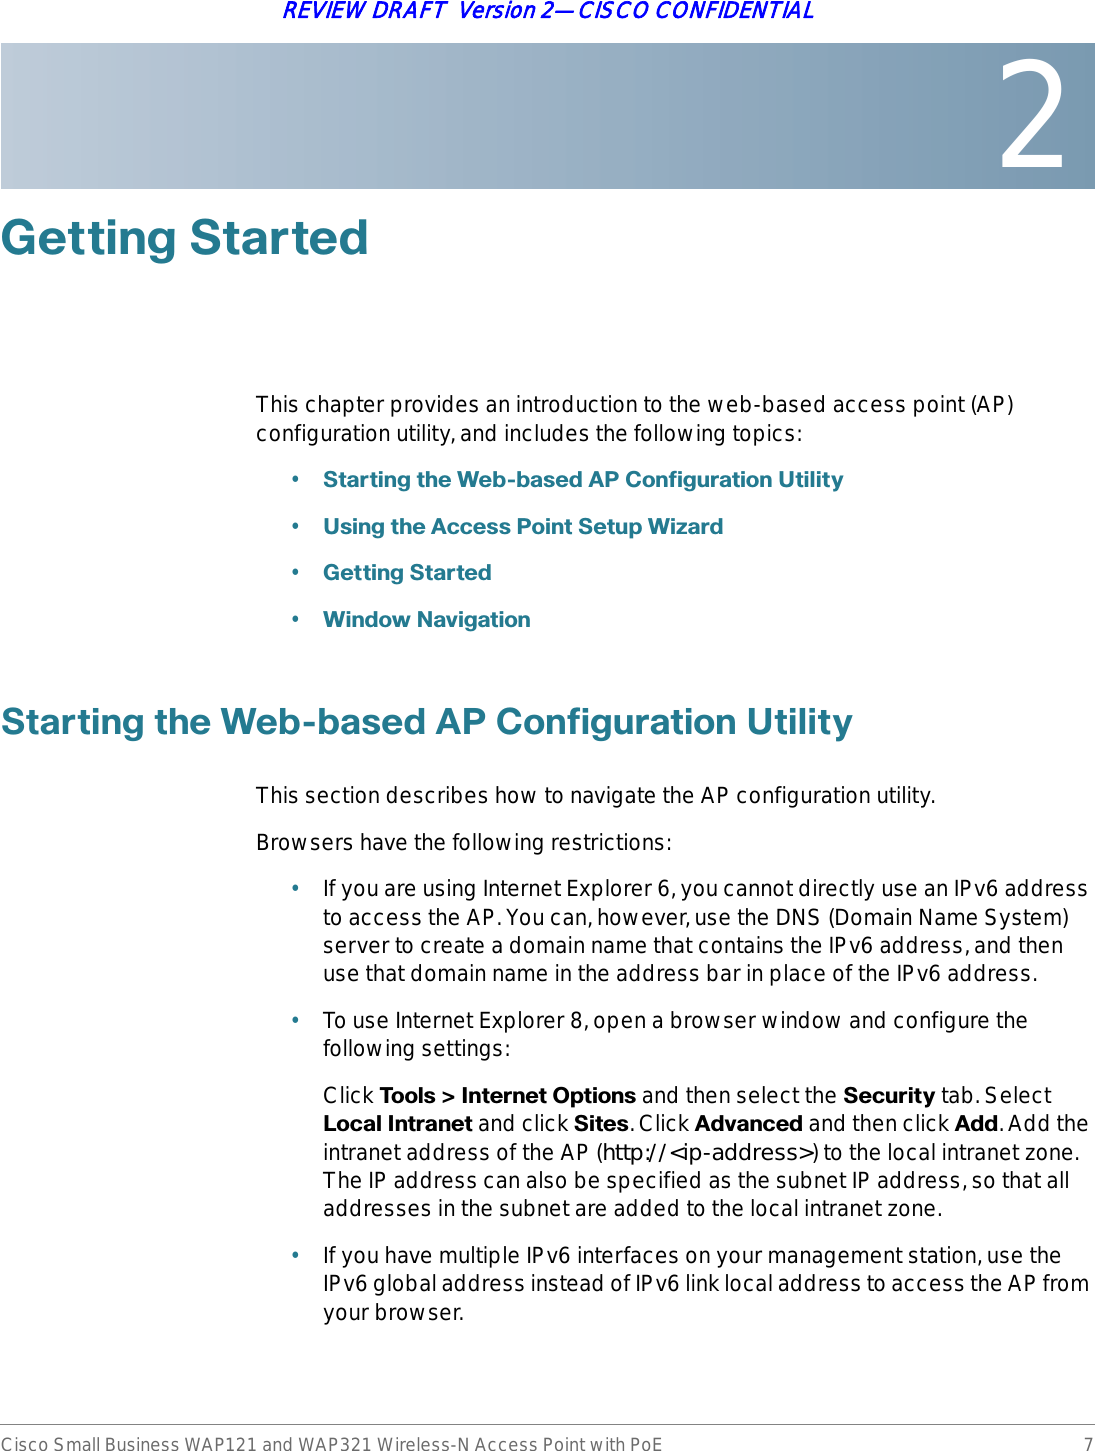 2Cisco Small Business WAP121 and WAP321 Wireless-N Access Point with PoE 7REVIEW DRAFT  Version 2—CISCO CONFIDENTIAL*HWWLQJ6WDUWHGThis chapter provides an introduction to the web-based access point (AP) configuration utility, and includes the following topics:•6WDUWLQJWKH:HEEDVHG$3&amp;RQILJXUDWLRQ8WLOLW\•8VLQJWKH$FFHVV3RLQW6HWXS:L]DUG•*HWWLQJ6WDUWHG•:LQGRZ1DYLJDWLRQ6WDUWLQJWKH:HEEDVHG$3&amp;RQILJXUDWLRQ8WLOLW\This section describes how to navigate the AP configuration utility.Browsers have the following restrictions:•If you are using Internet Explorer 6, you cannot directly use an IPv6 address to access the AP. You can, however, use the DNS (Domain Name System) server to create a domain name that contains the IPv6 address, and then use that domain name in the address bar in place of the IPv6 address.•To use Internet Explorer 8, open a browser window and configure the following settings:Click 7RROV!,QWHUQHW2SWLRQV and then select the 6HFXULW\ tab. Select /RFDO,QWUDQHW and click 6LWHV. Click $GYDQFHG and then click $GG. Add the intranet address of the AP (http://&lt;ip-address&gt;) to the local intranet zone. The IP address can also be specified as the subnet IP address, so that all addresses in the subnet are added to the local intranet zone.•If you have multiple IPv6 interfaces on your management station, use the IPv6 global address instead of IPv6 link local address to access the AP from your browser.